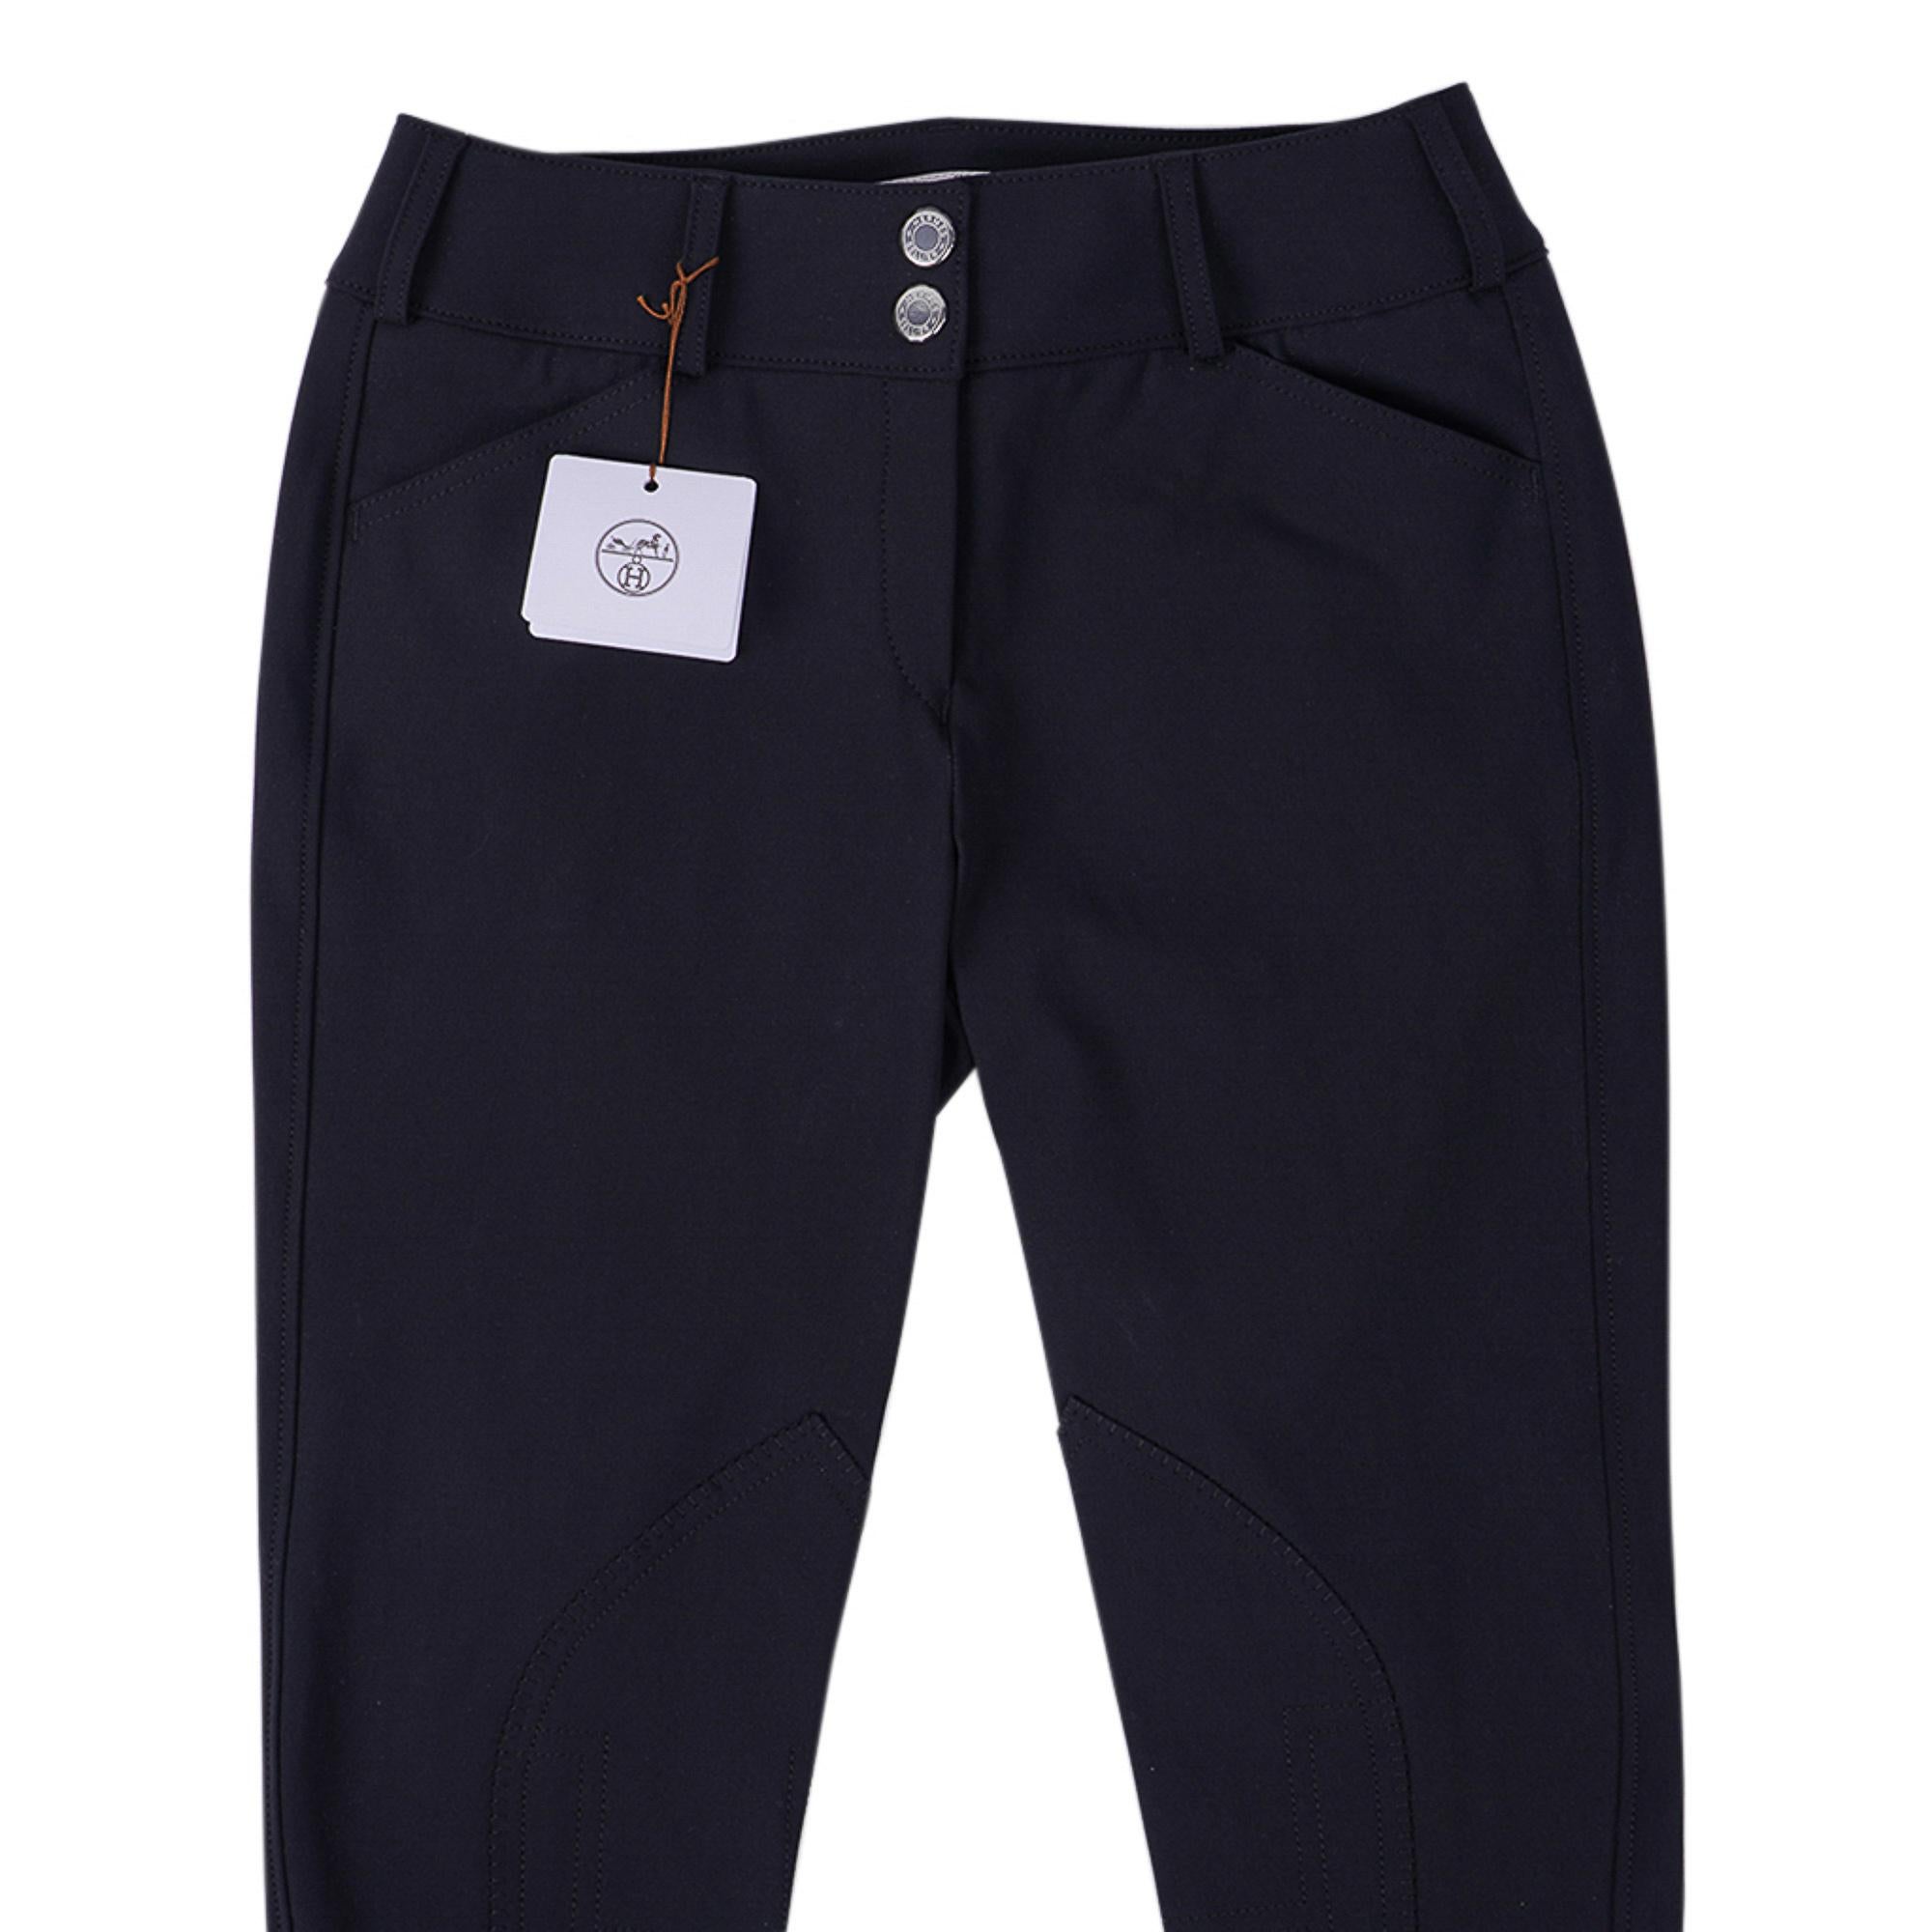 Mightychic offers Hermes Black Swing Dressage Breeches featured in Black.
These stretch riding pants are in a strong and breathable fabric.
Low rise with Orange Trim at ankle.
Silicone injected grip.
Jodhpur stitching detail inside the knee